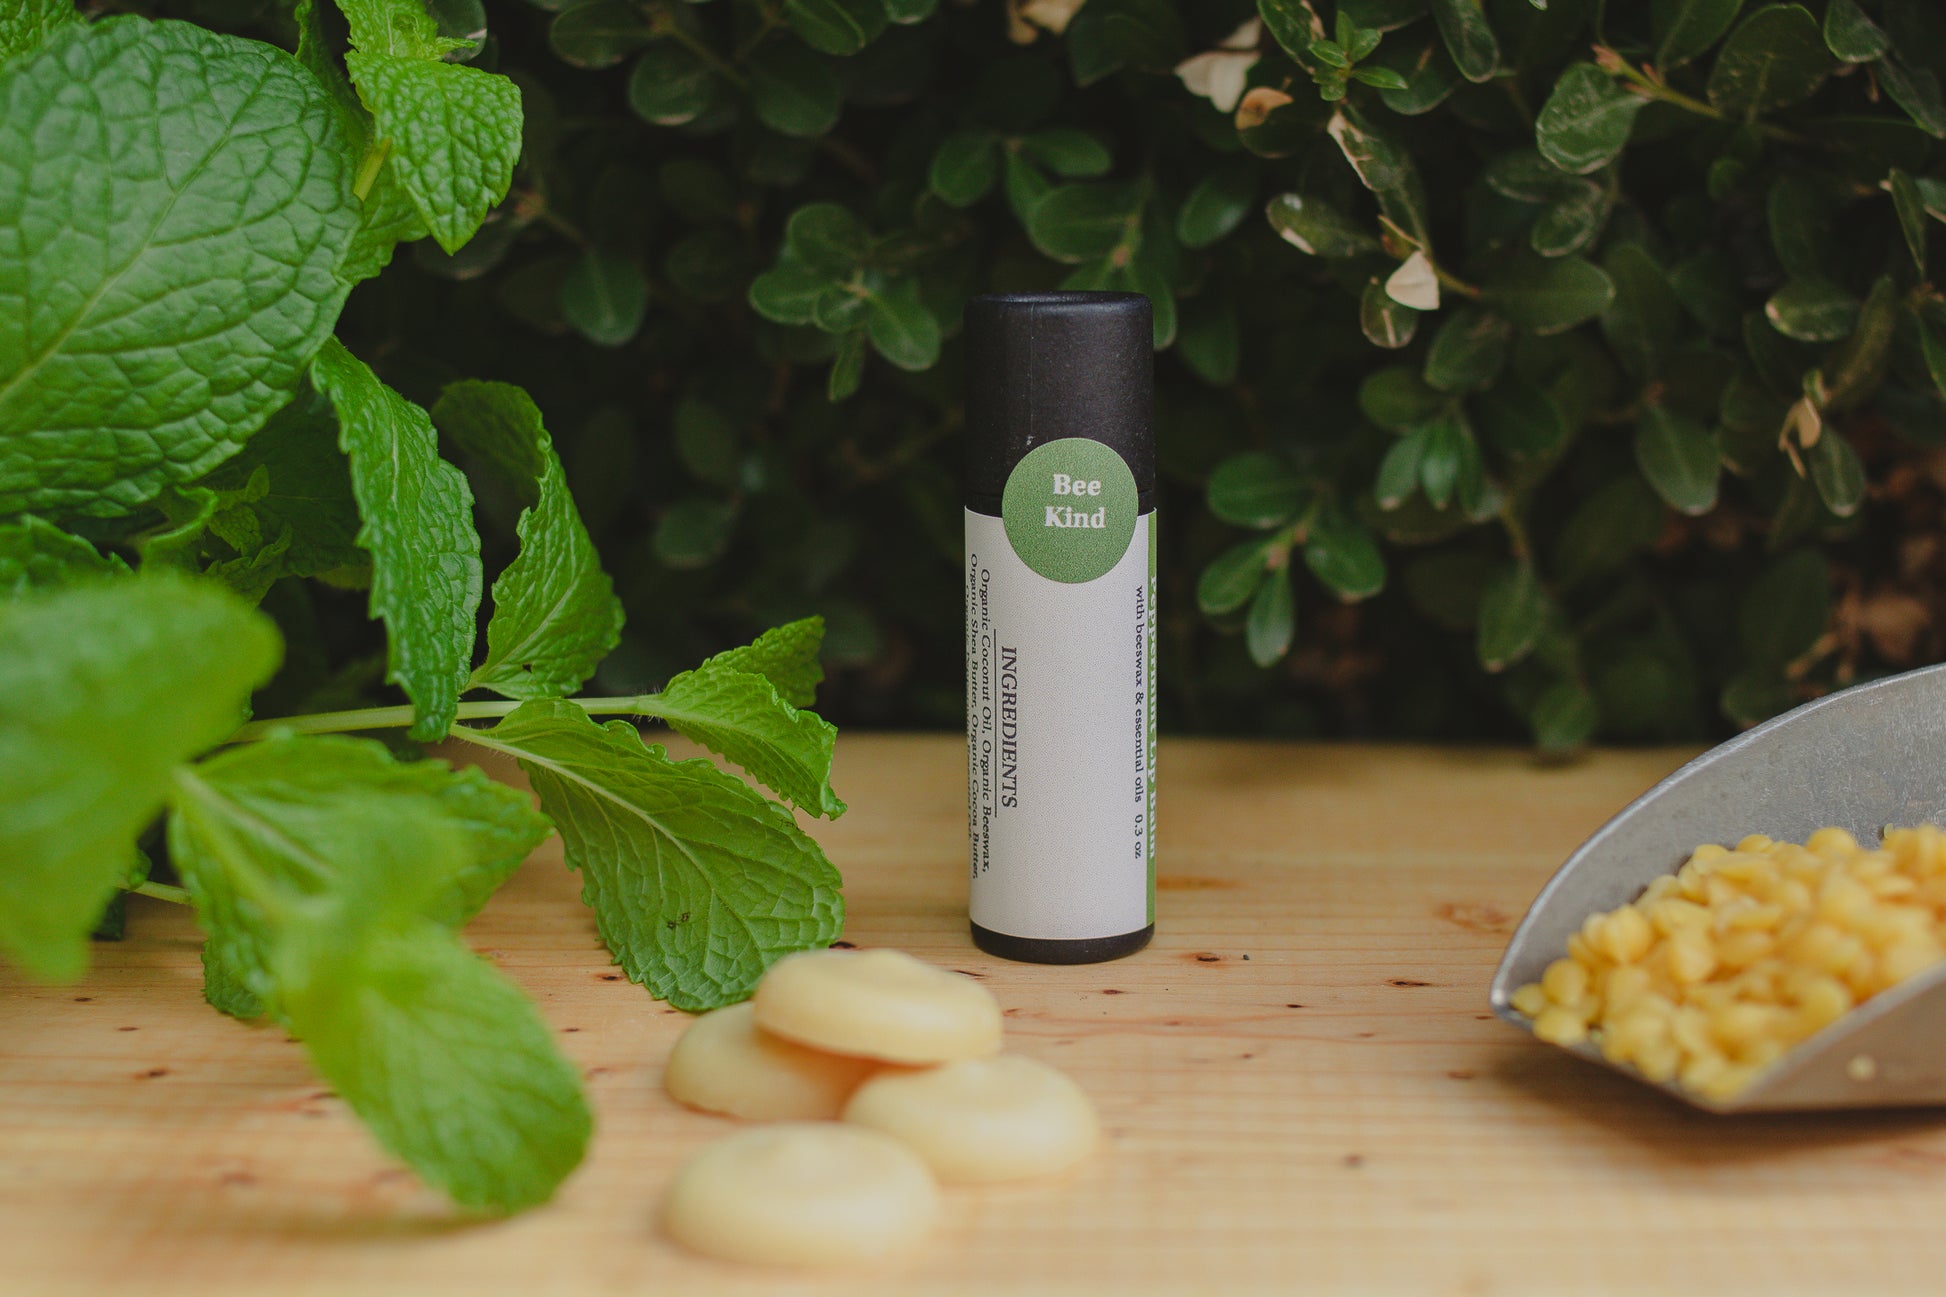 Peppermint Beeswax Lip Balm - Katie and Kameron's Kandles